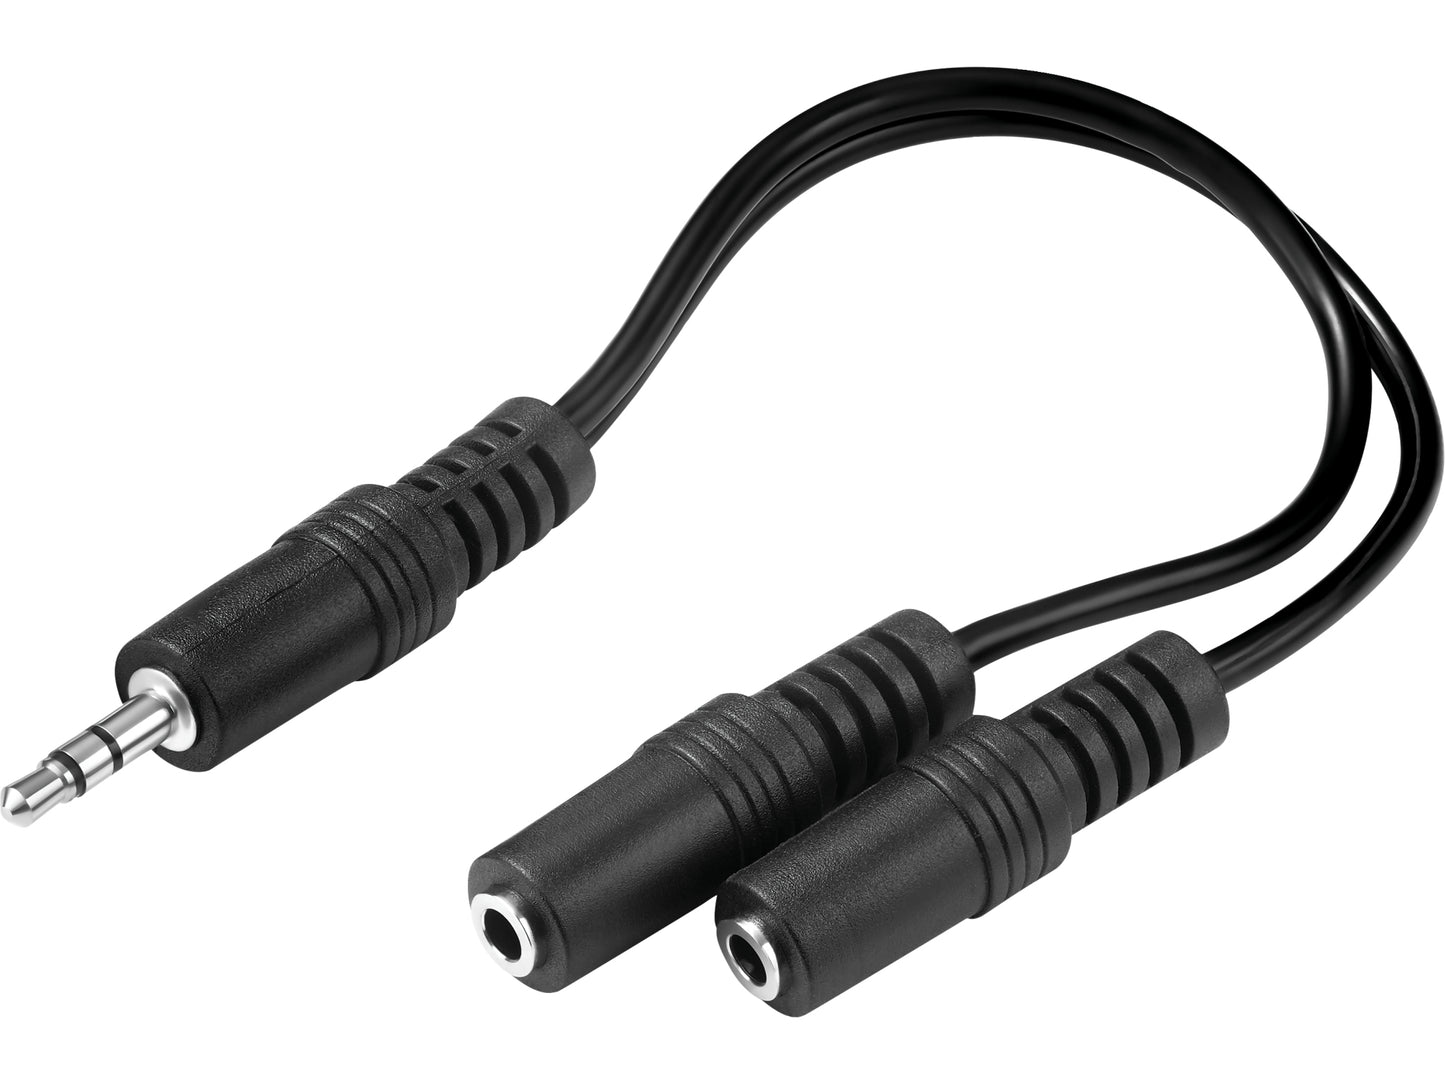 MiniJack Splitter Sandberg 502-16 - 1 to 2, Share Audio Outputs for Two Sets of Devices